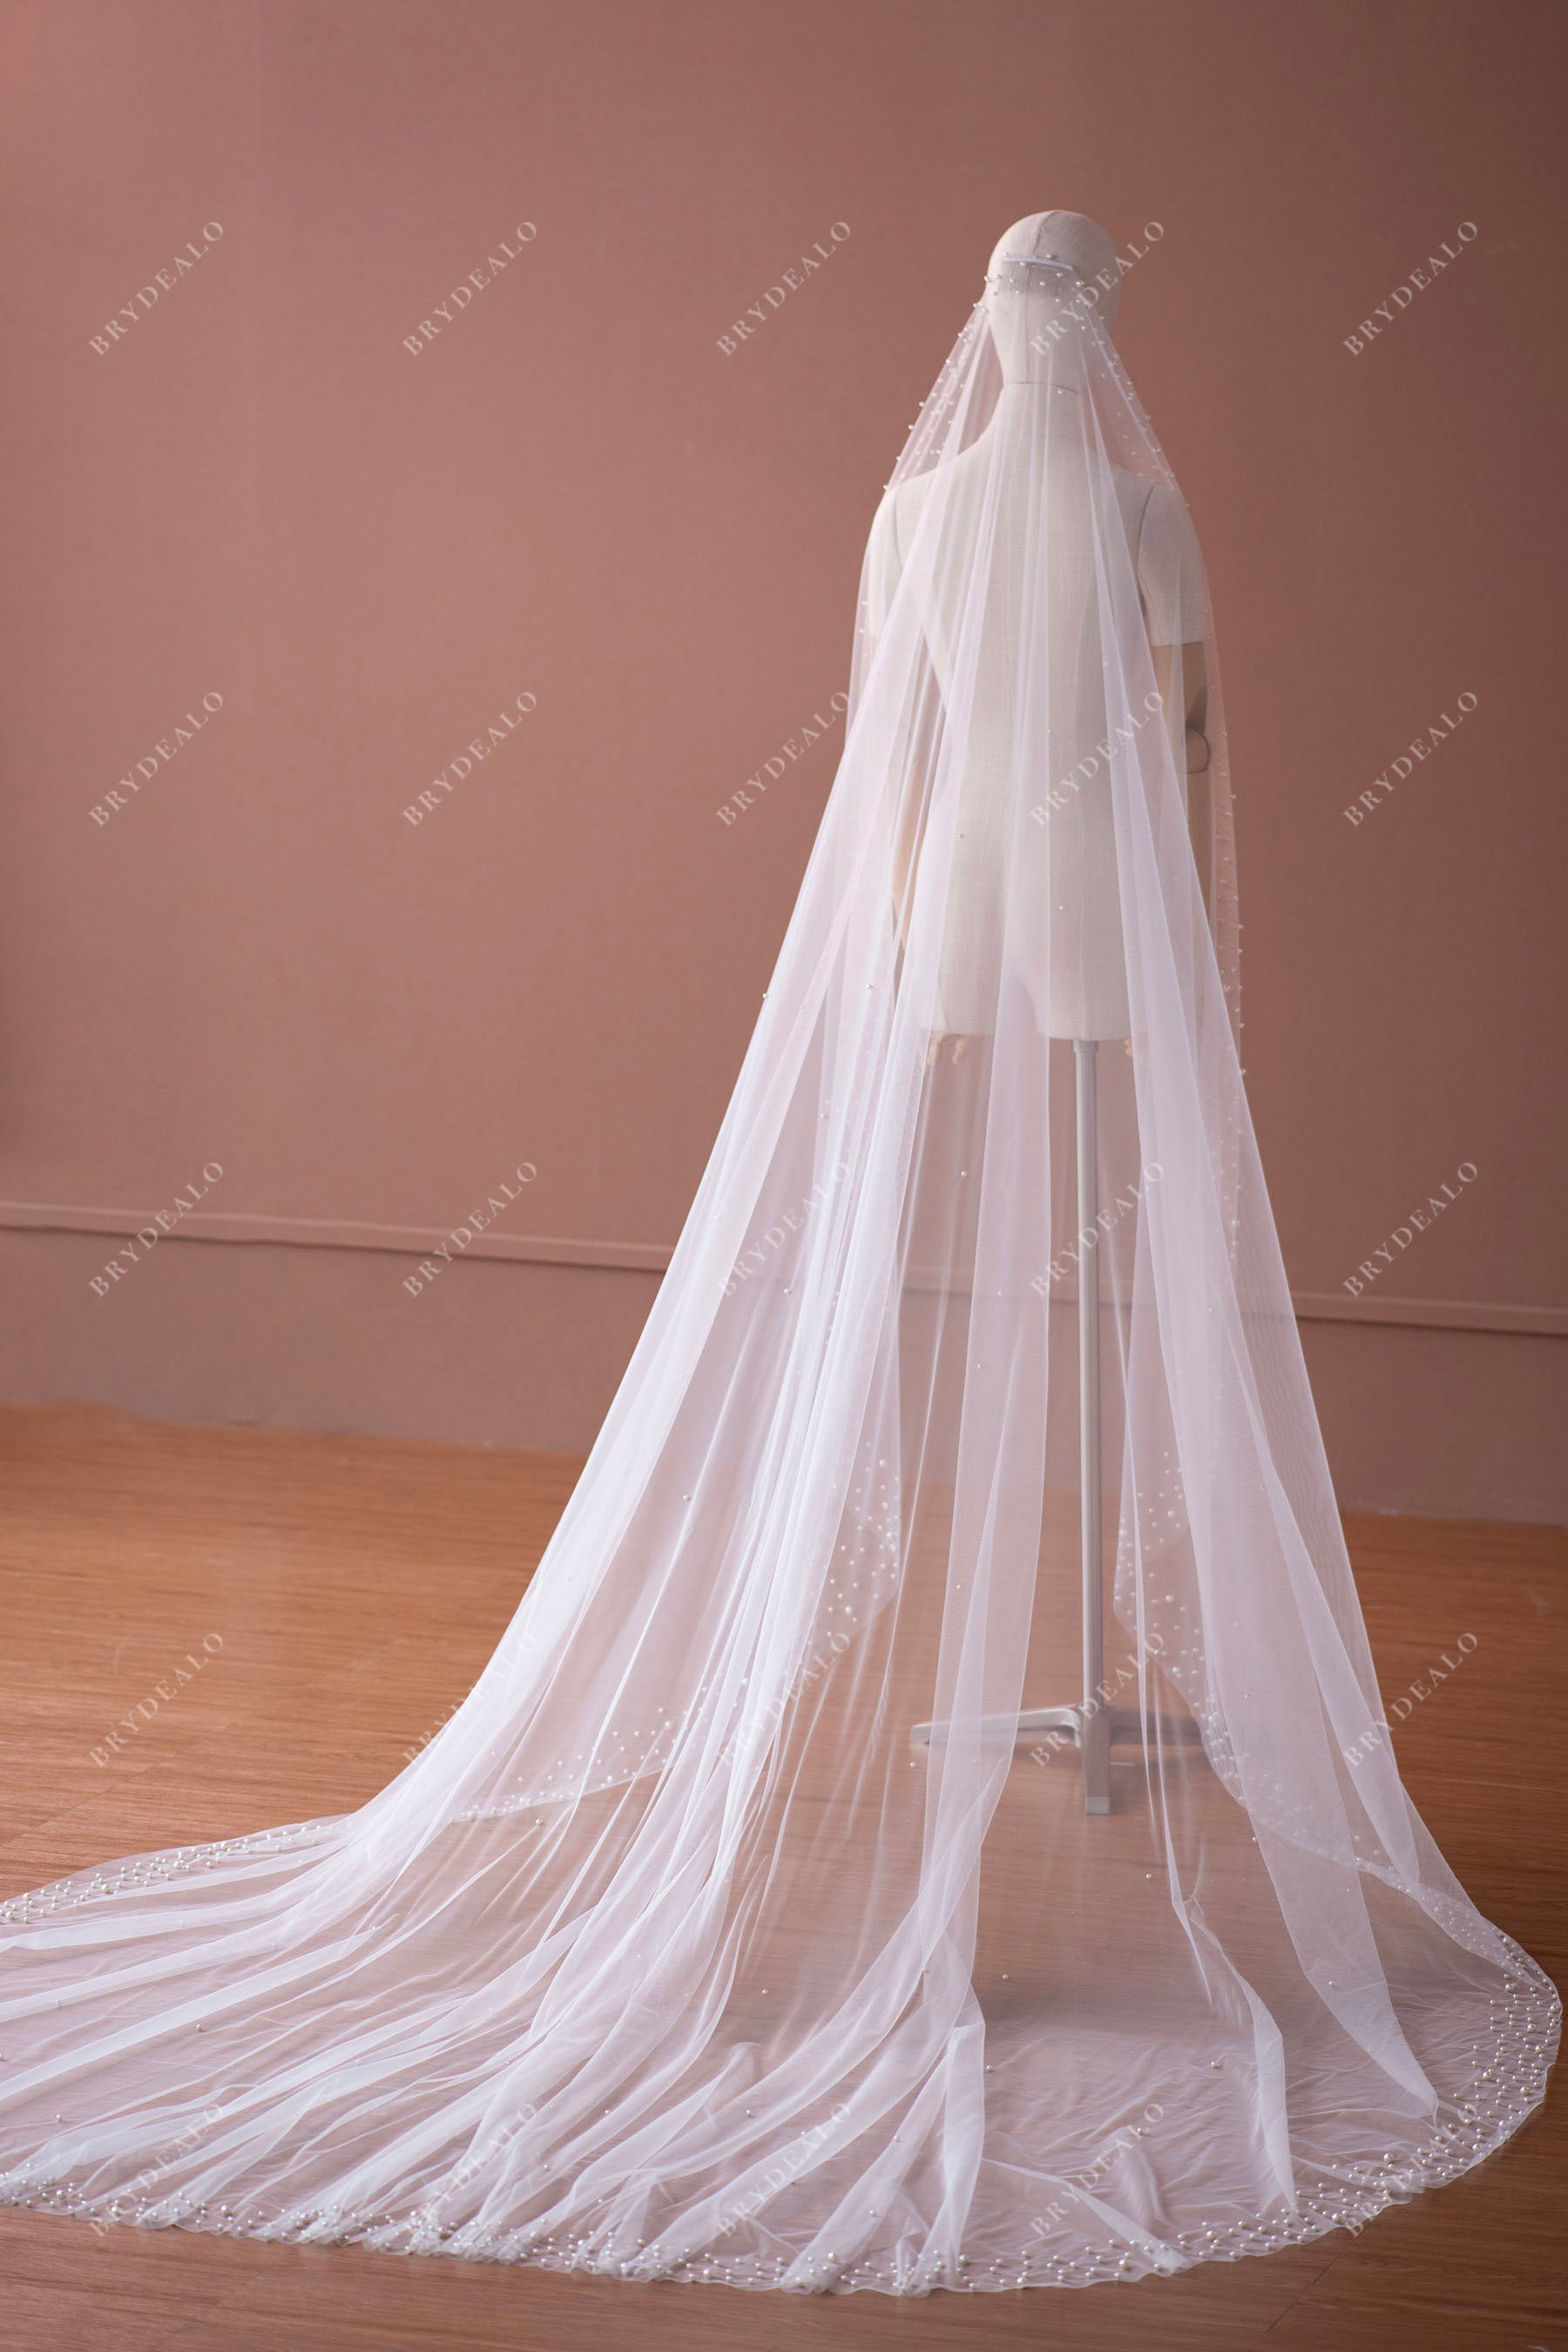 https://cdn.shopify.com/s/files/1/0558/7599/3647/products/Cathedral-pearl-wedding-veil.jpg?v=1657025899&width=1800